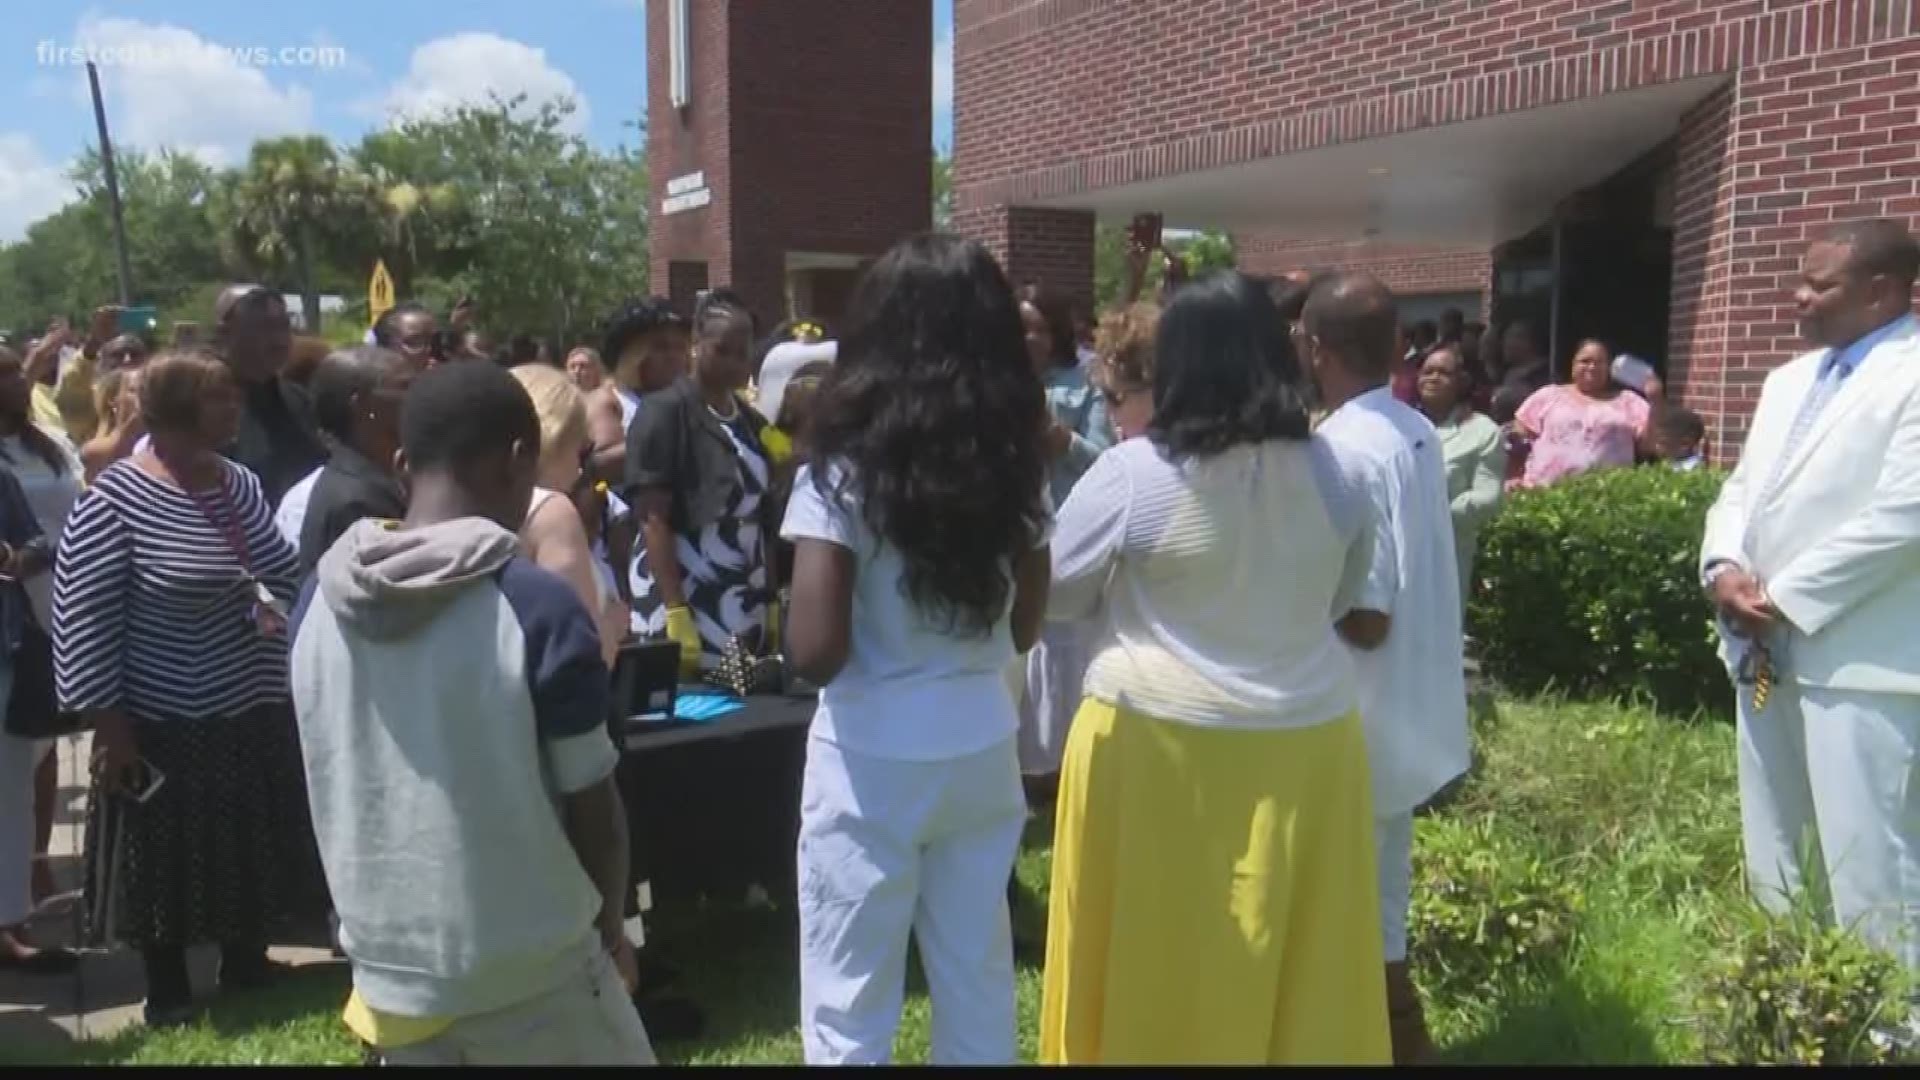 Hundreds of people were gathered at the Wayman Temple AME church for the funeral of 6-year-old Jaelah Smith Saturday morning.